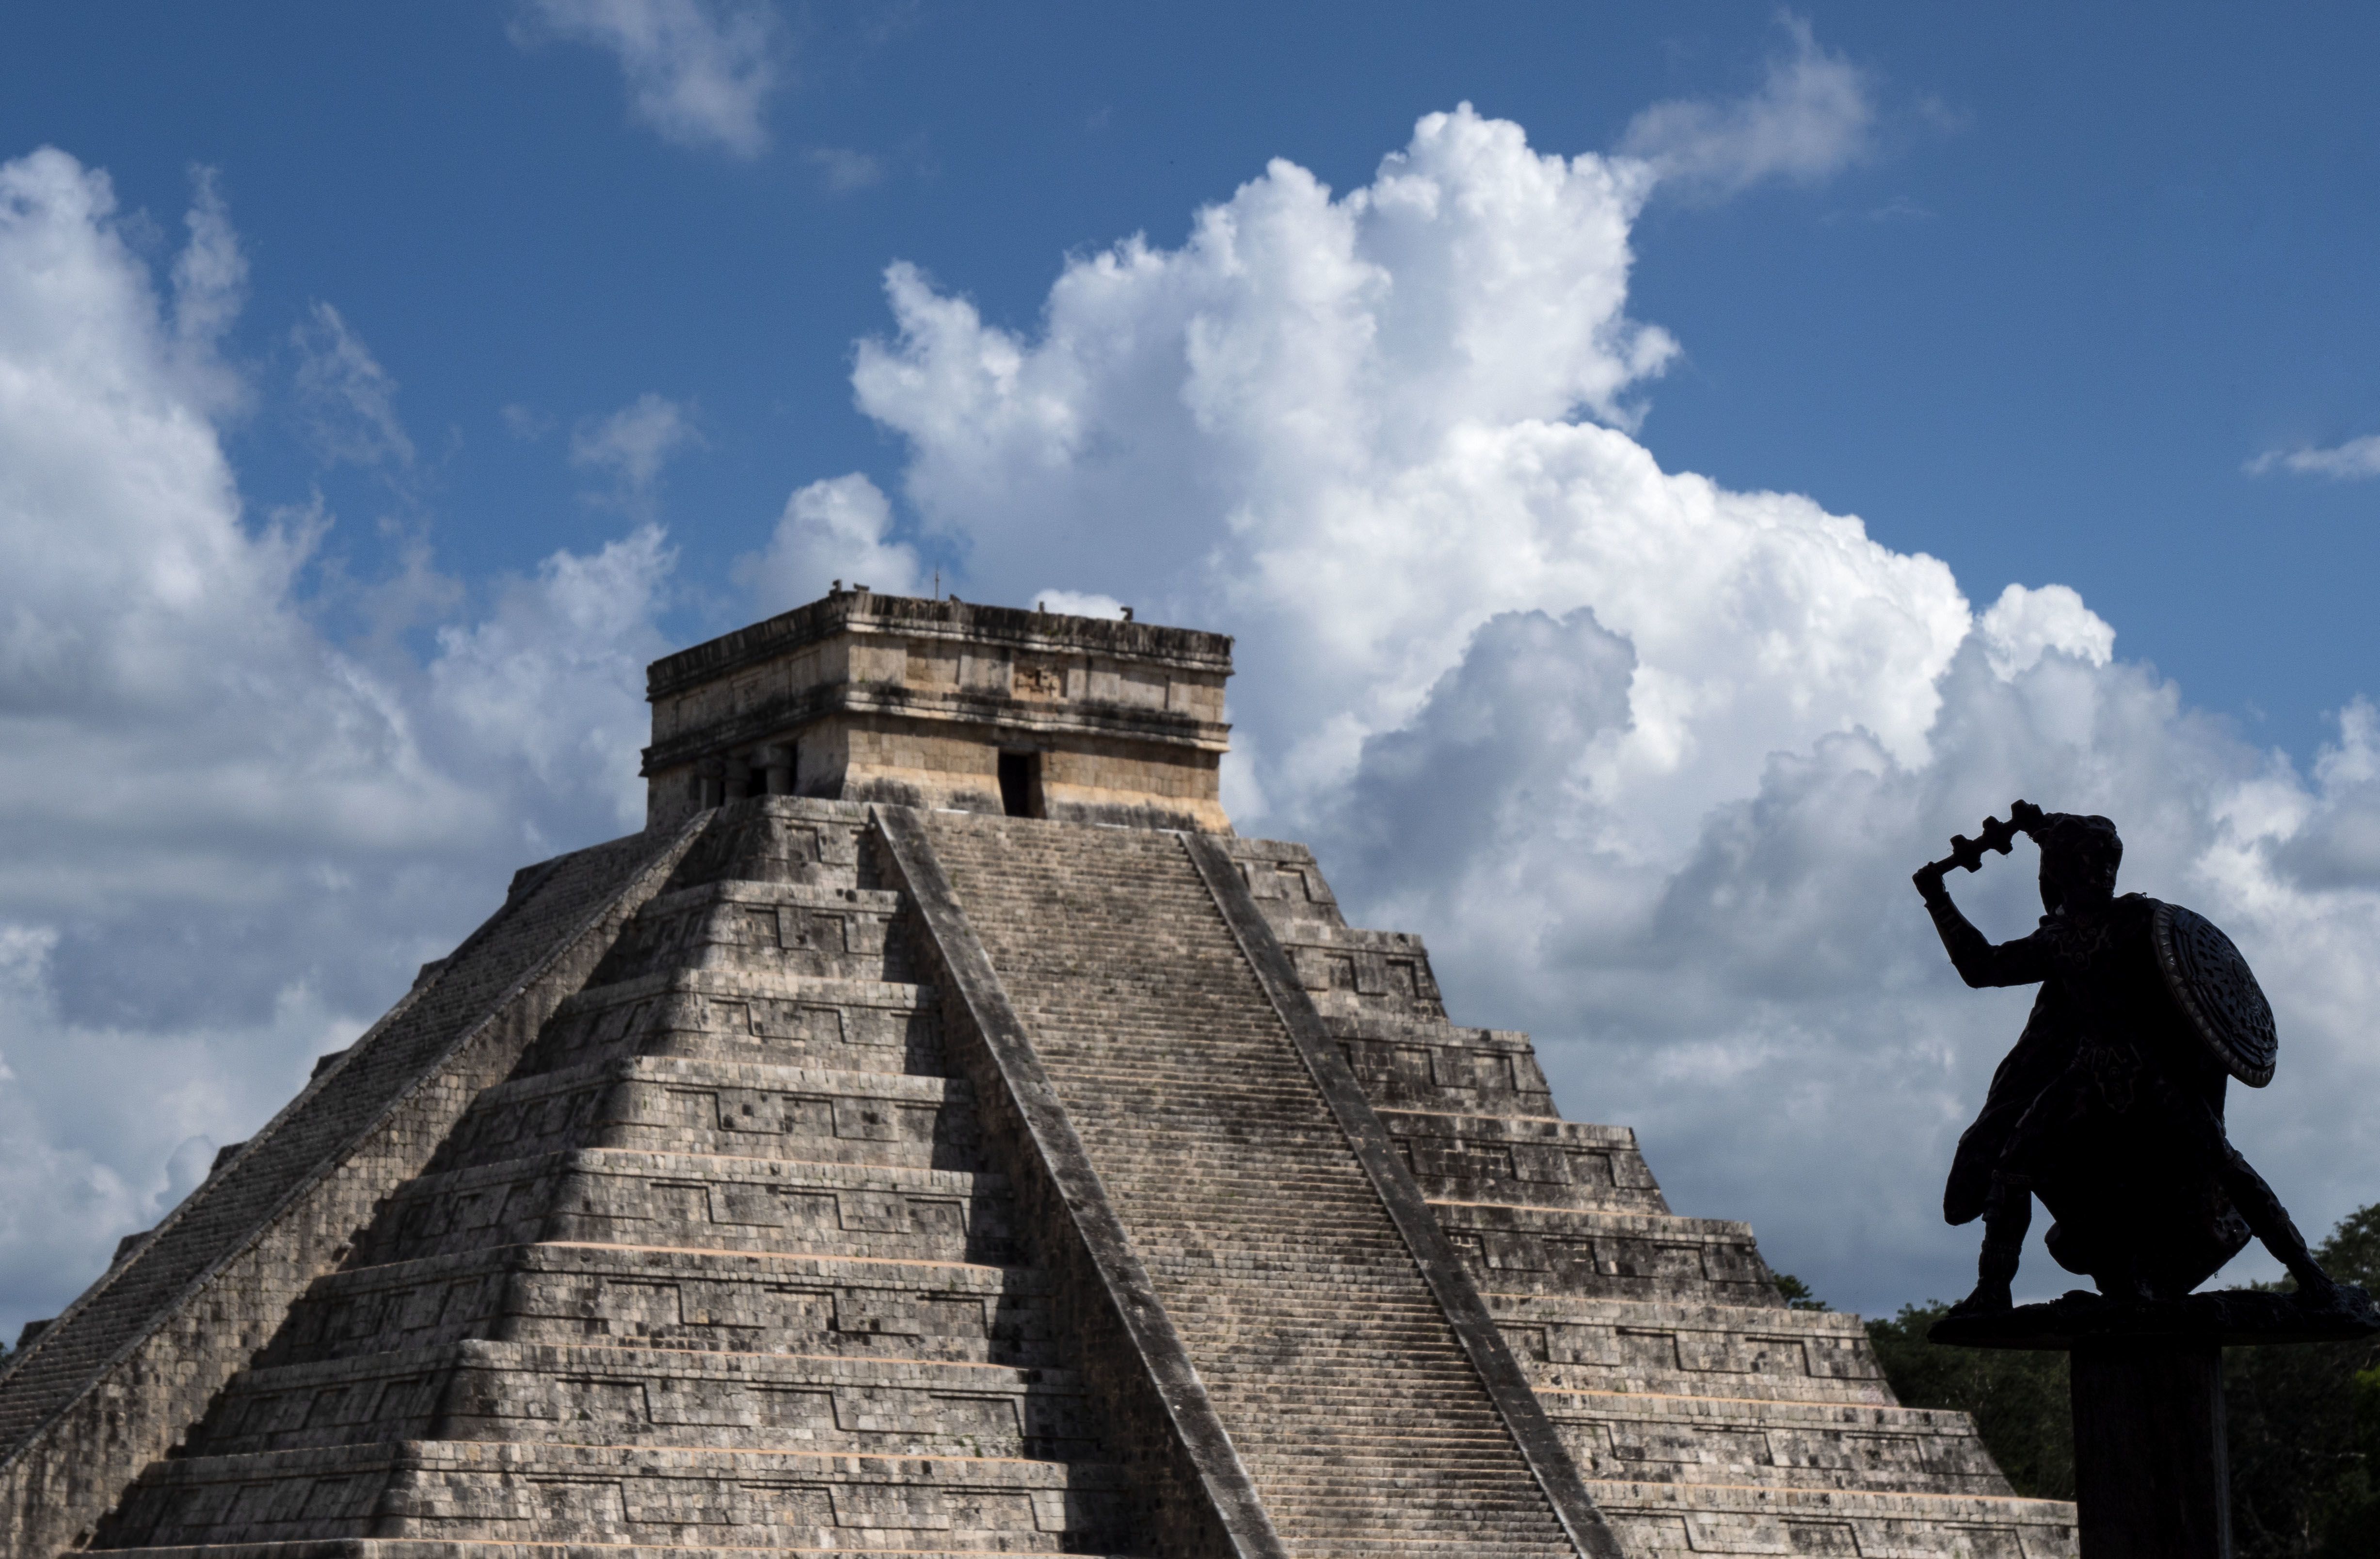 What Are the New Seven Wonders of the World?